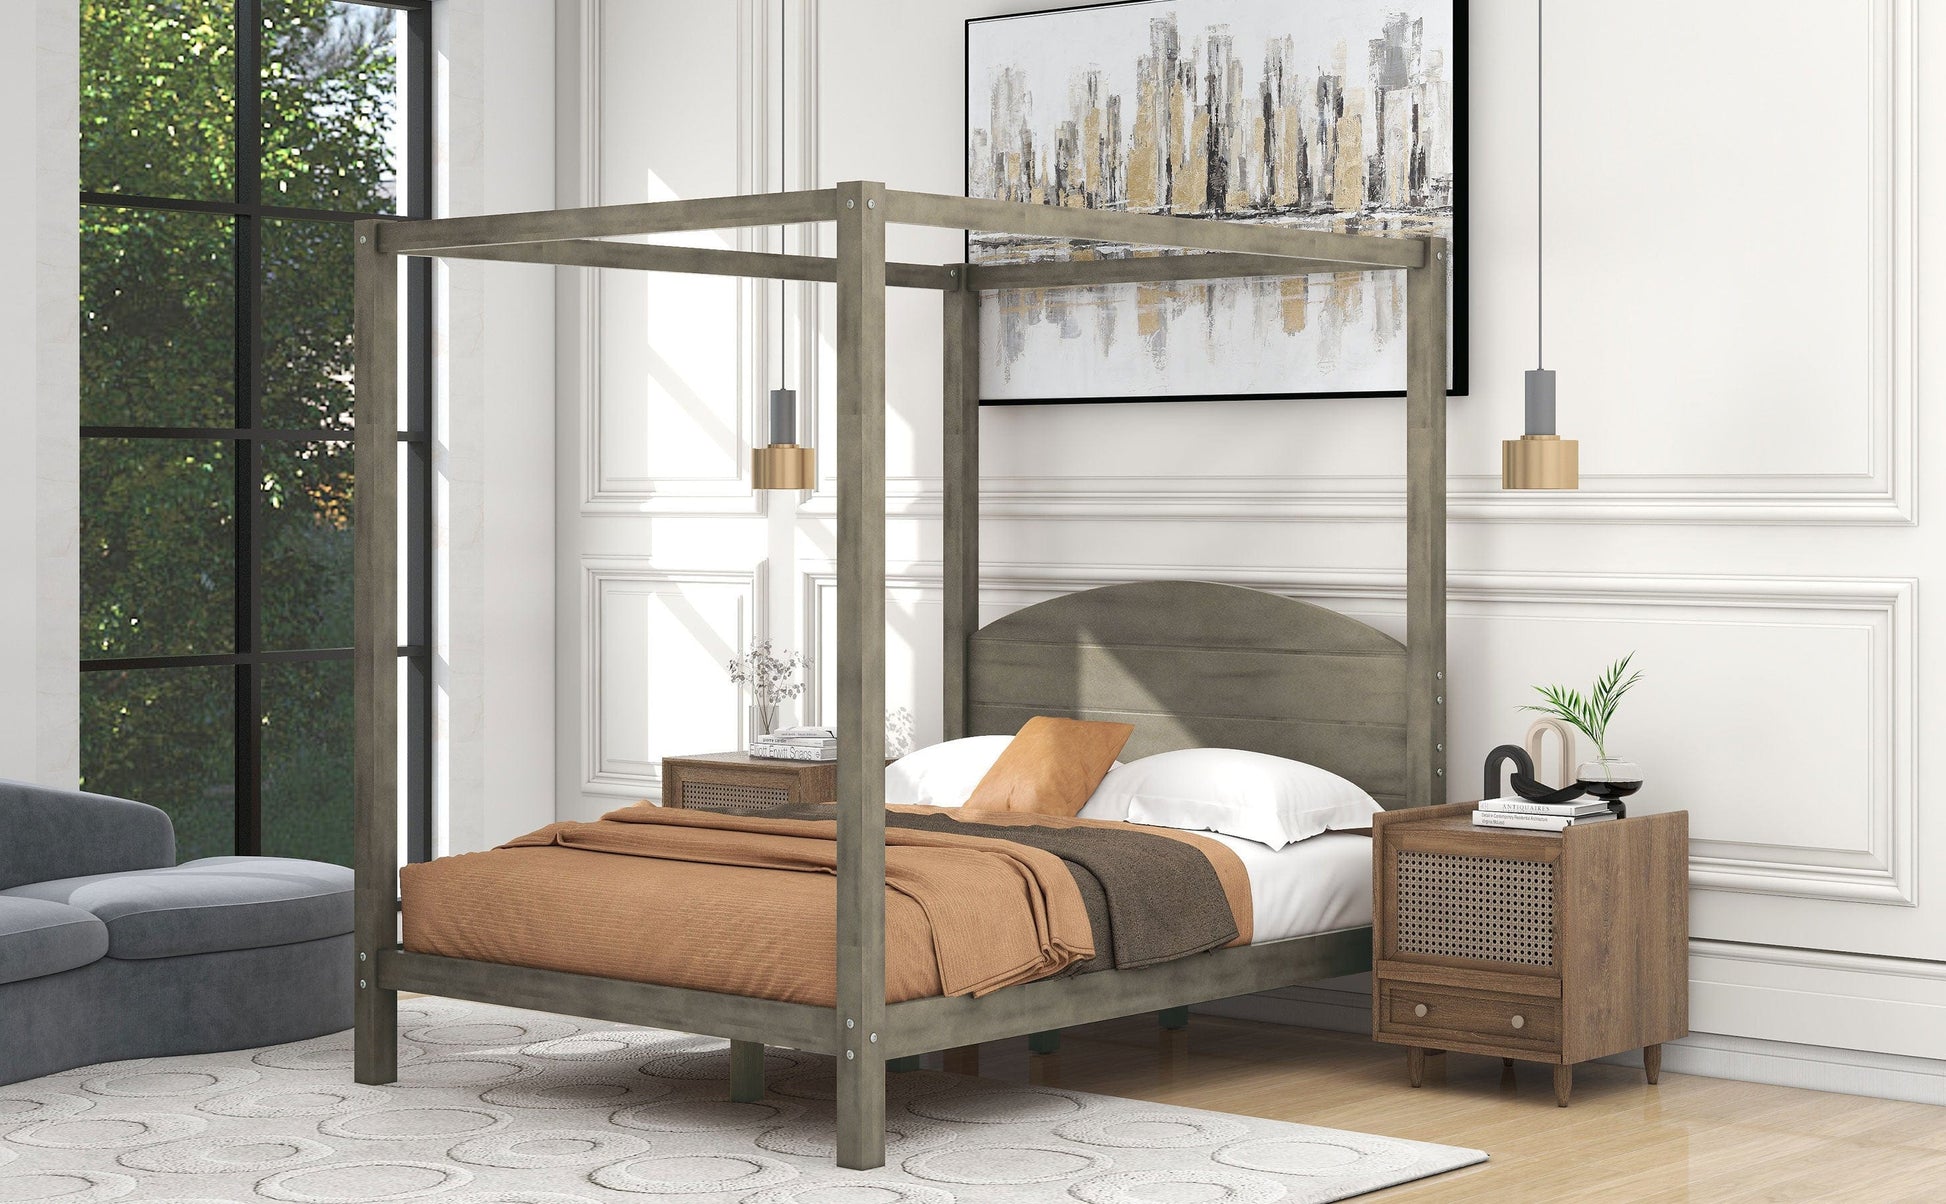 1st Choice Furniture Direct Bed 1st Choice Brown Wash Canopy Bed w/ Headboard & Support Legs